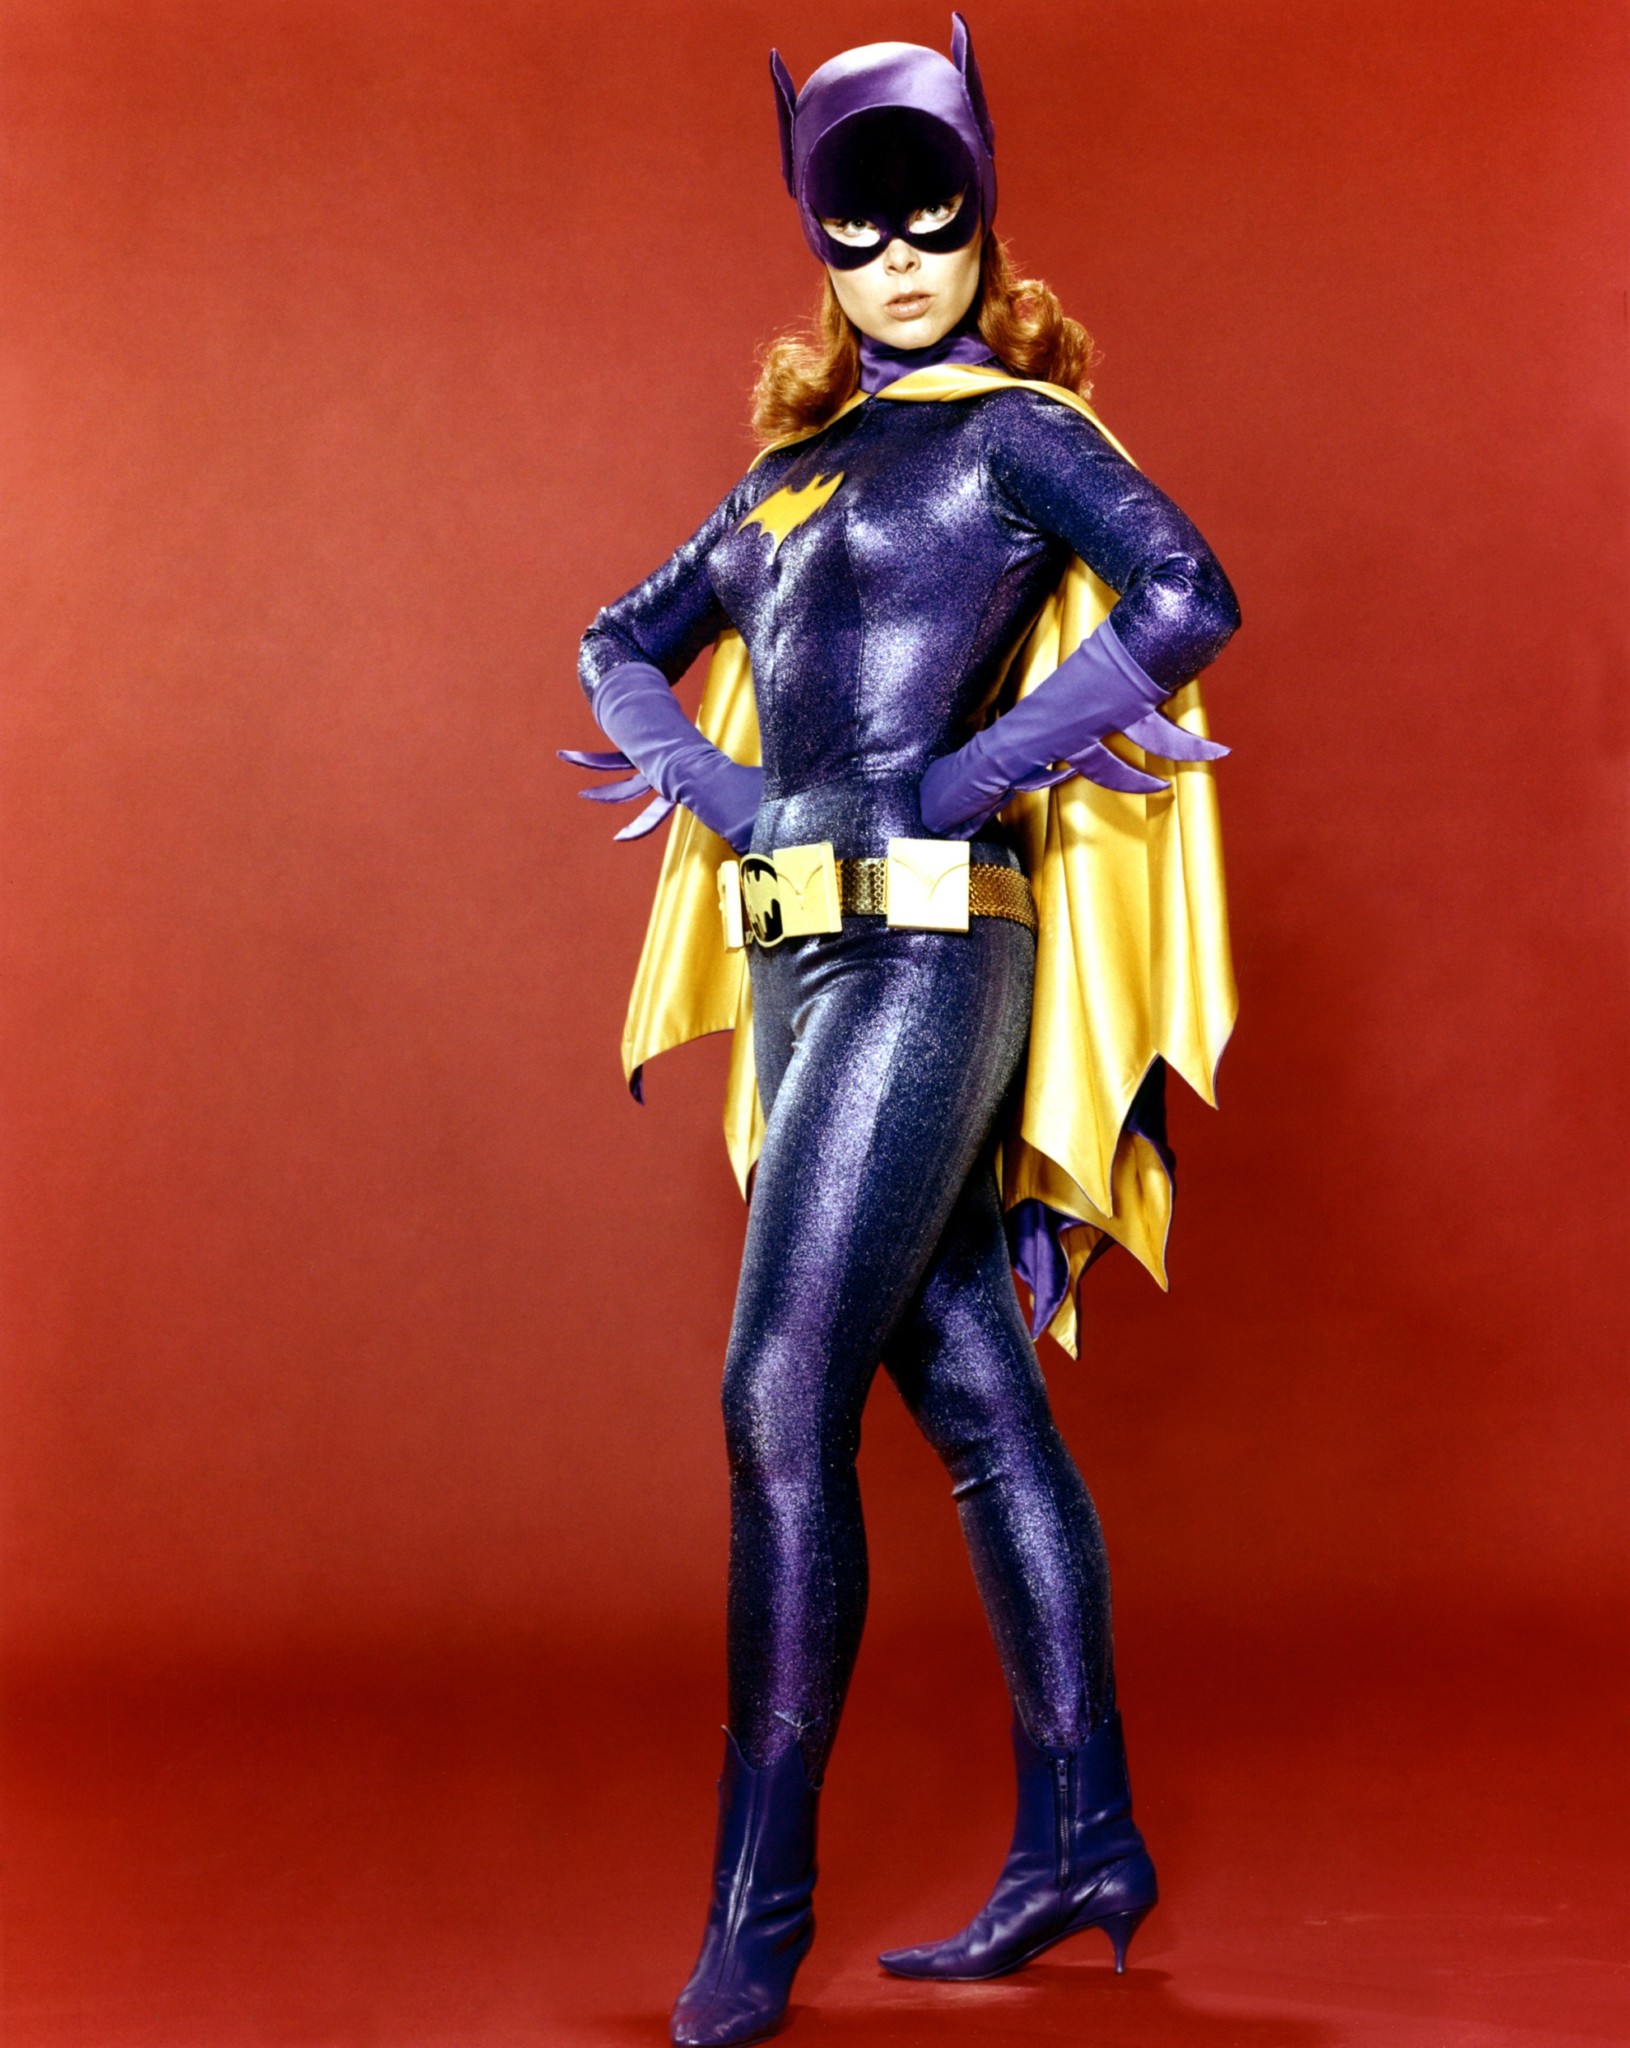 BATMAN, Yvonne Craig, 1966-68, TM and Copyright © 20th Century Fox Film Corp. All rights reserved, C